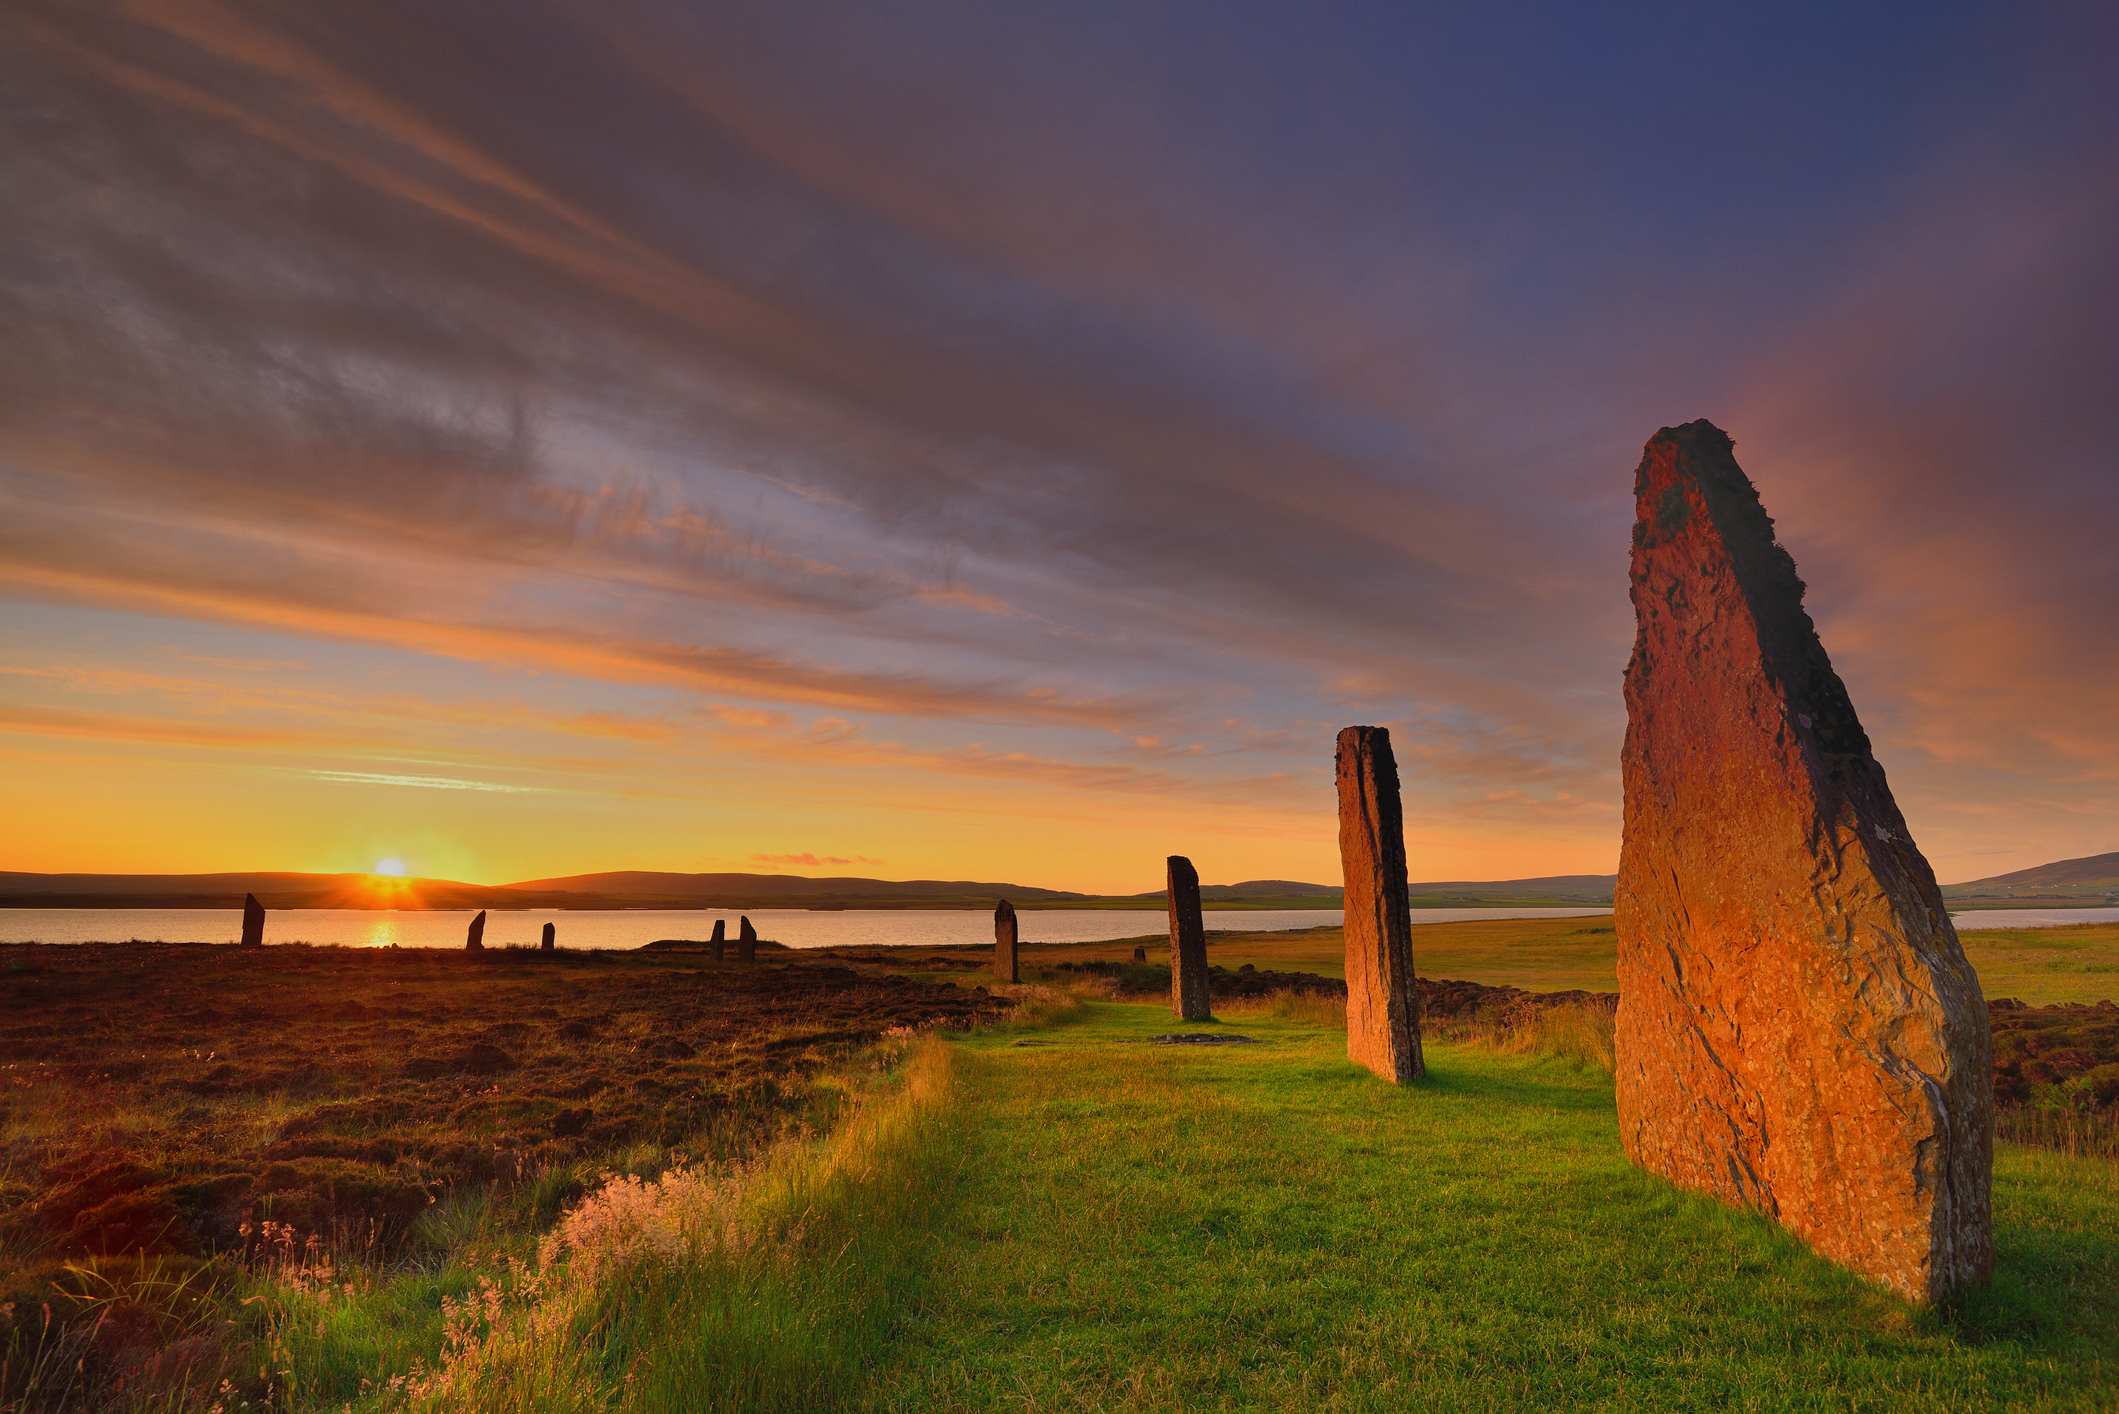 The deal includes funding for Orkney's historic standing stones site. (Image: iStock).